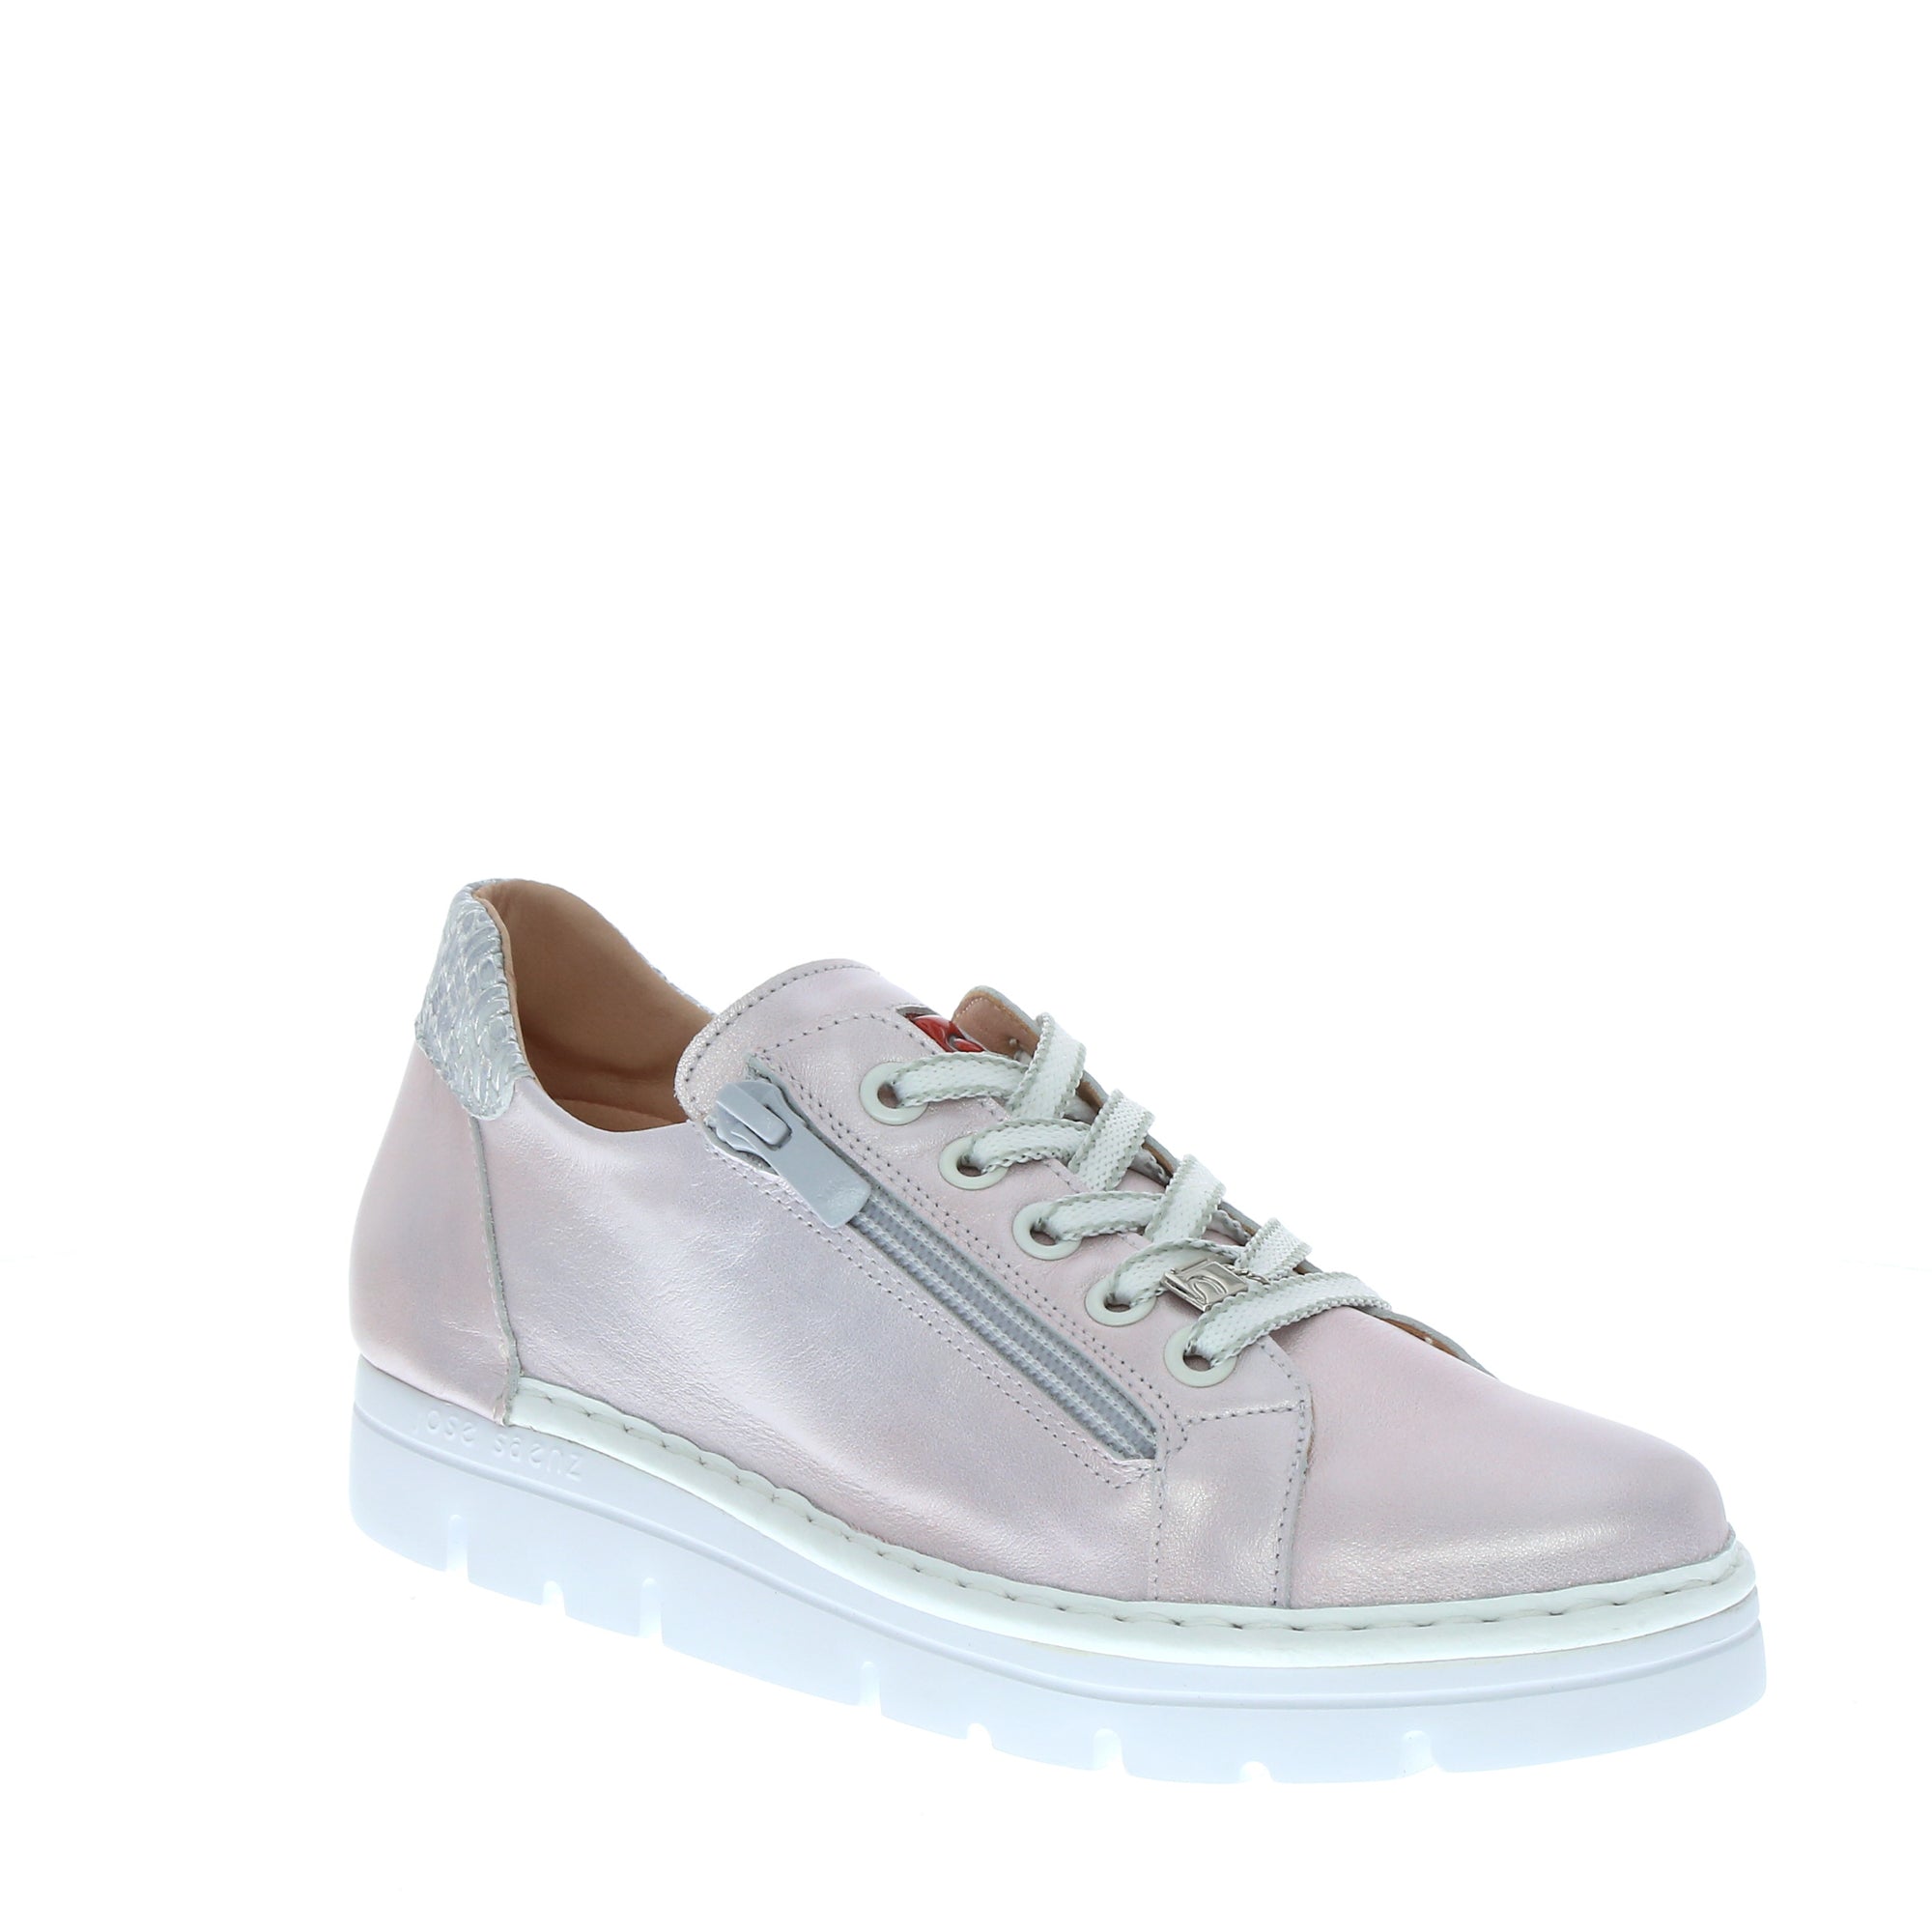 Parallel Culture Shoes and Fashion Online SNEAKERS JOSE SAENZ LADY SNEAKER - CUARZO